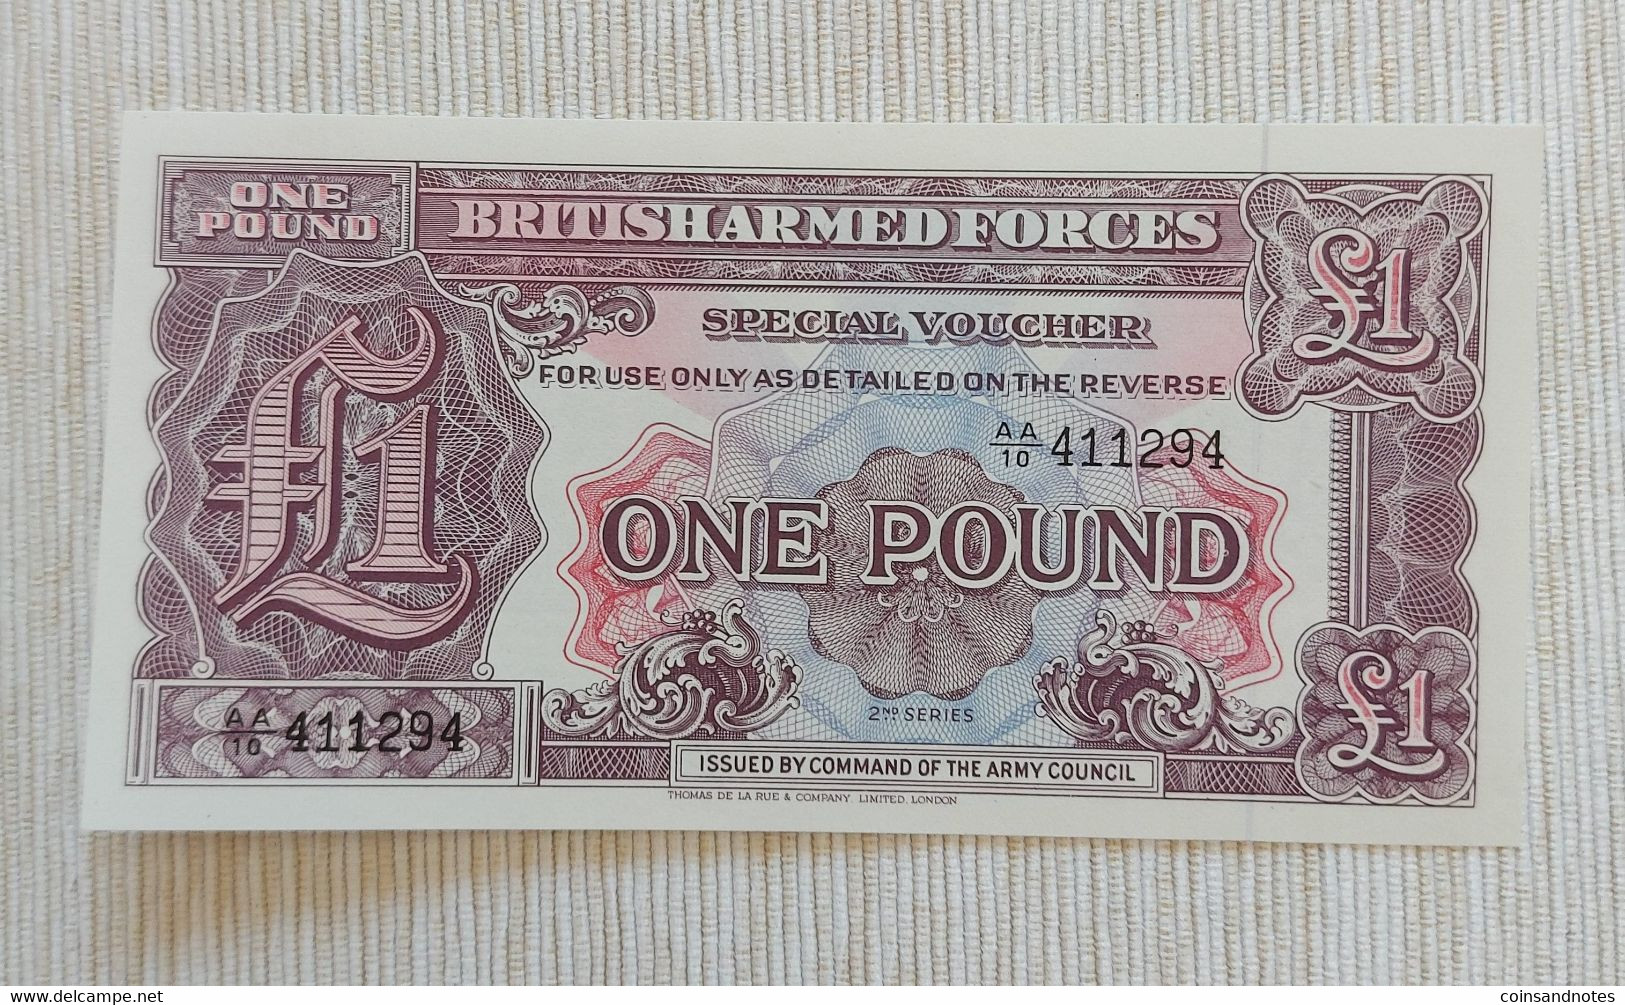 UK 1948 - British Armed Forces 1 Pound - 4th Series - AA/10 411294 - UNC - British Armed Forces & Special Vouchers